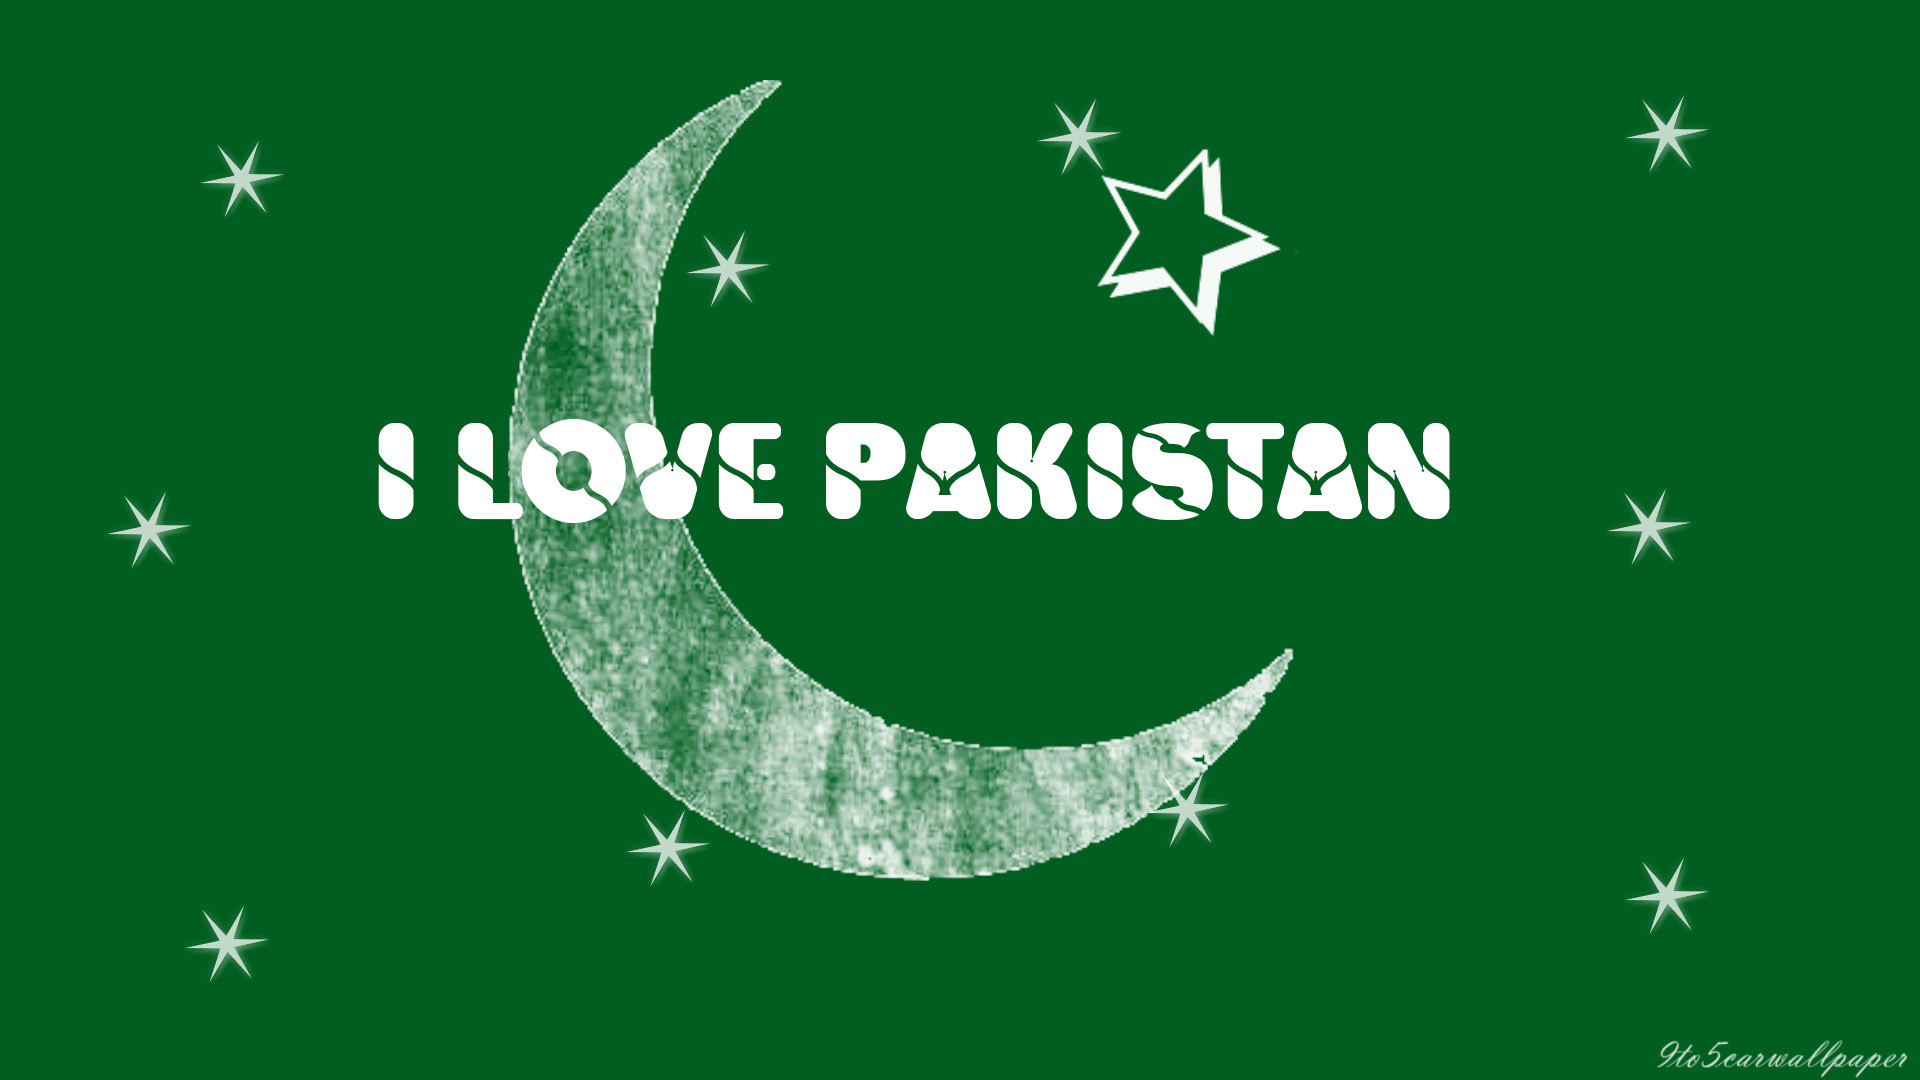 1920x1080 i-love-Pakistan-hd-wallpapers-images-2017 Independence Day ...